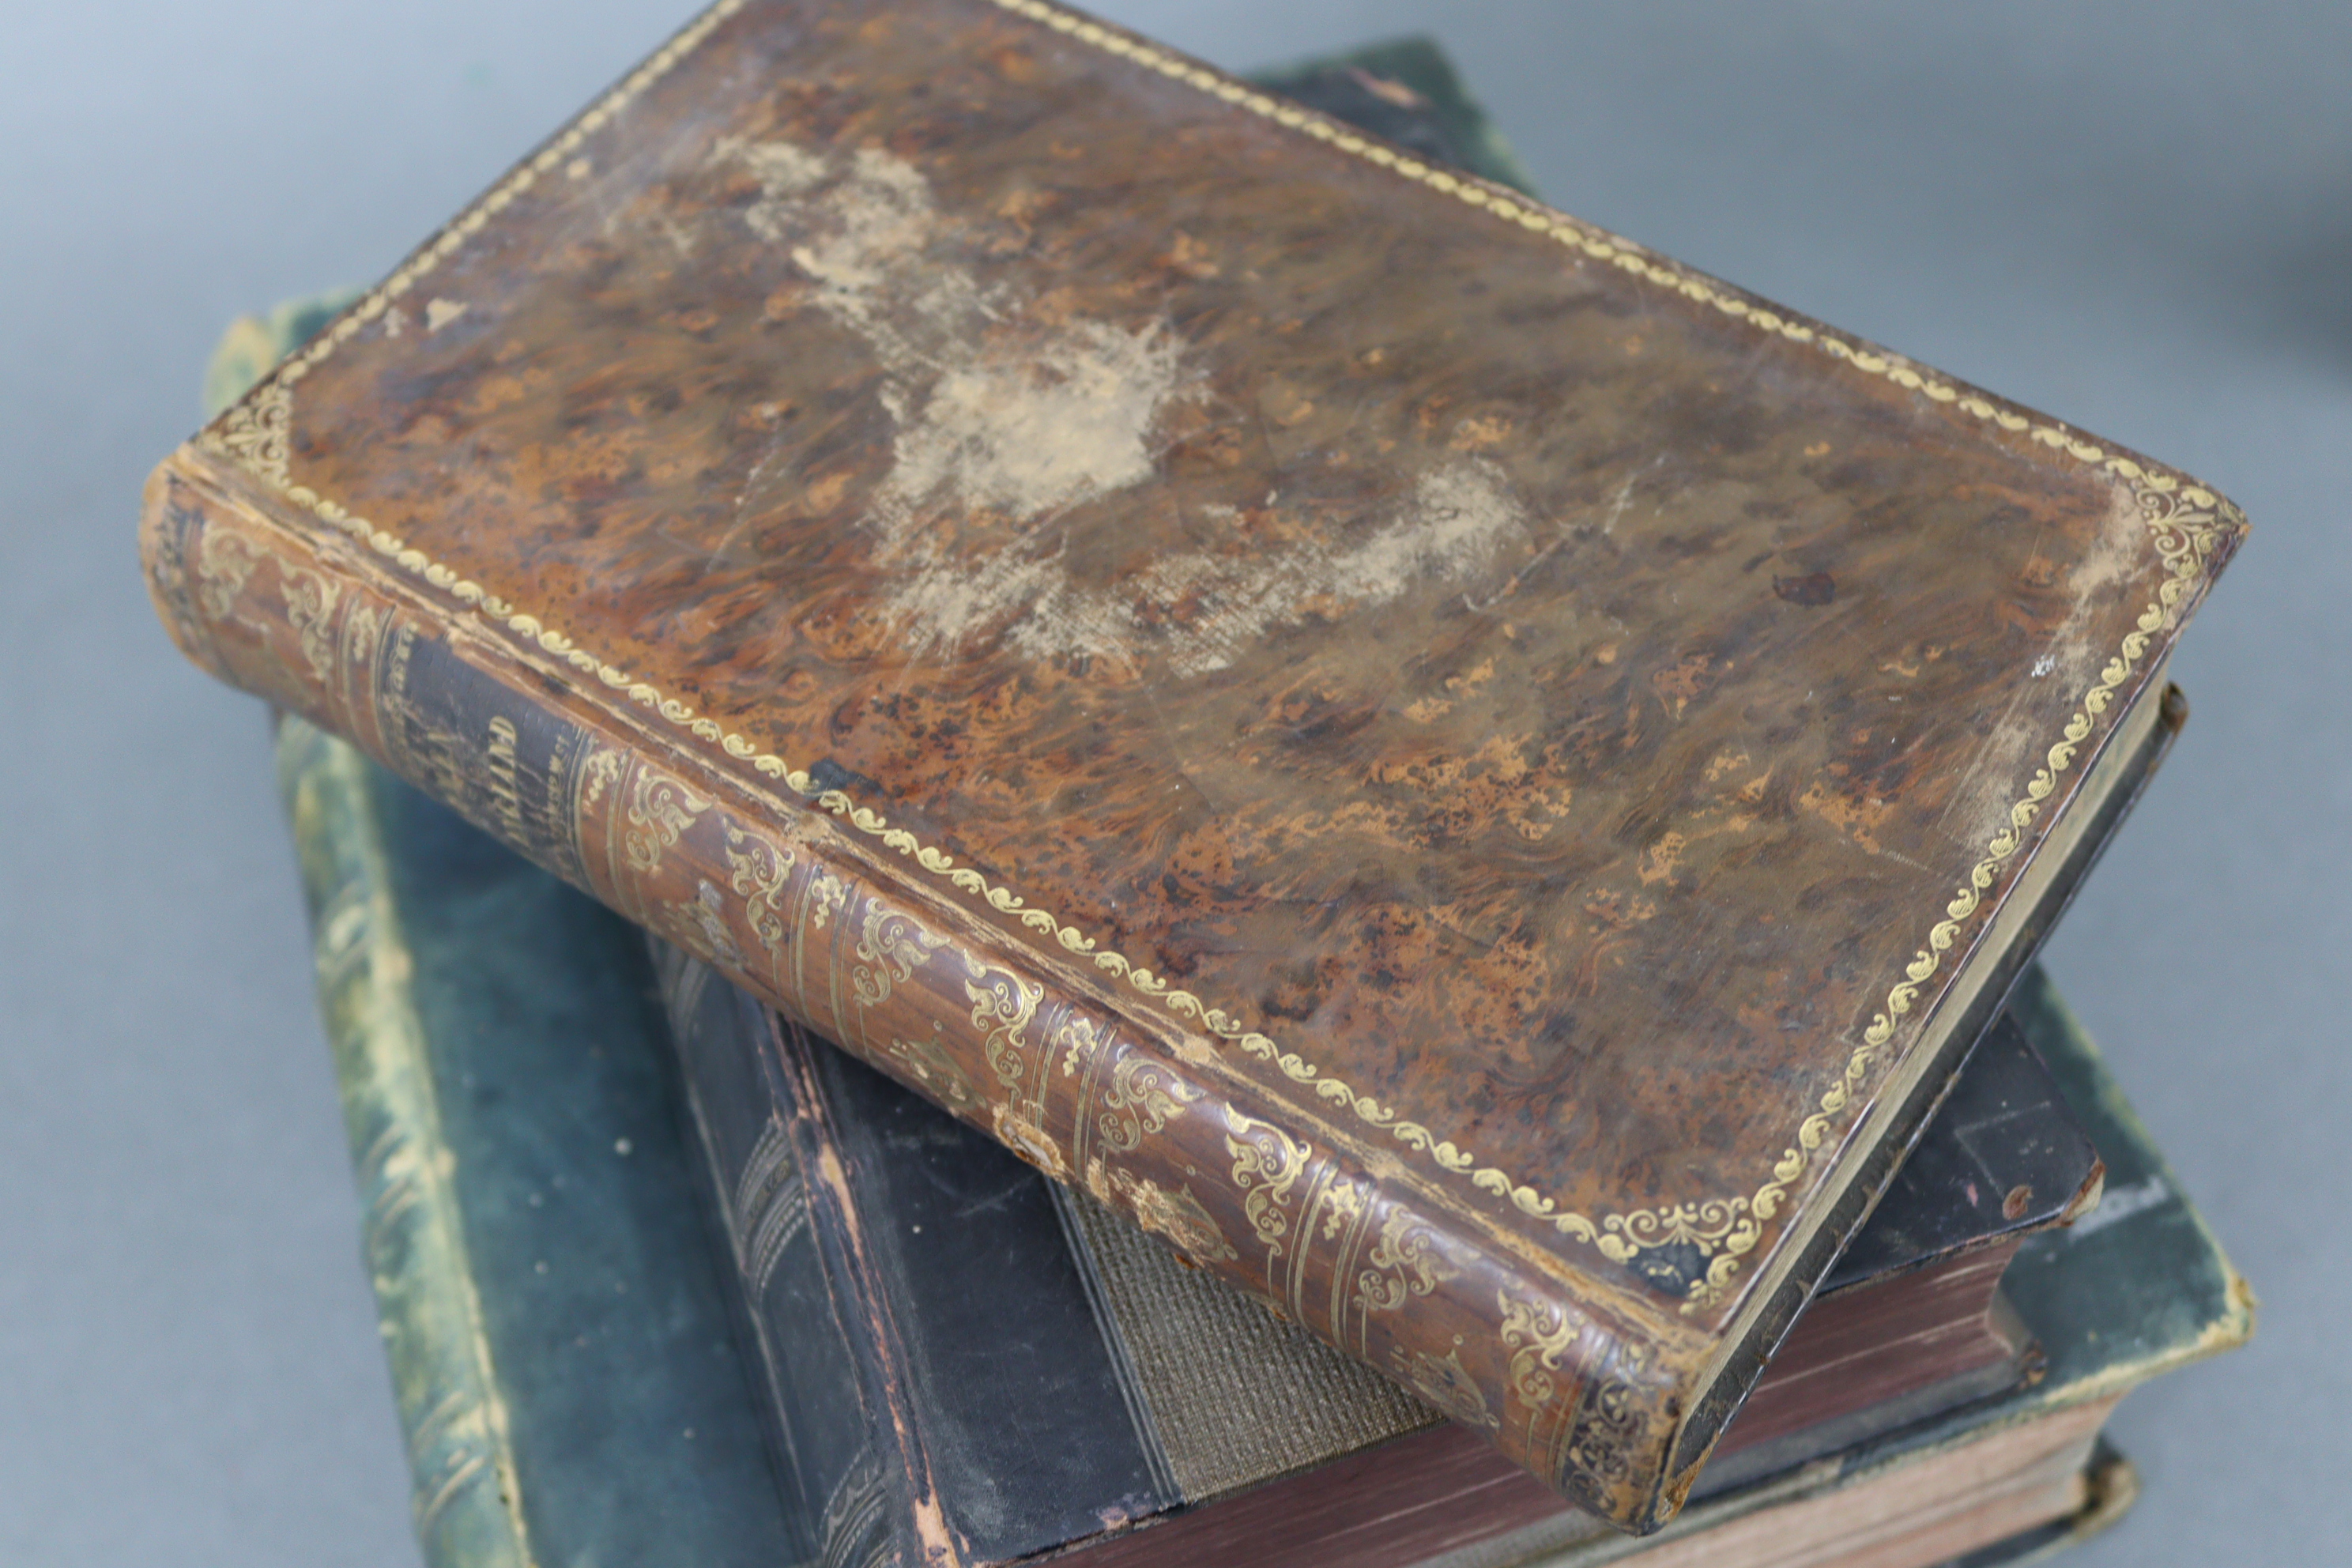 Two 19th century leather-bound volumes by Mrs Ellis “The Daughters of England” & “The Women of - Image 13 of 22